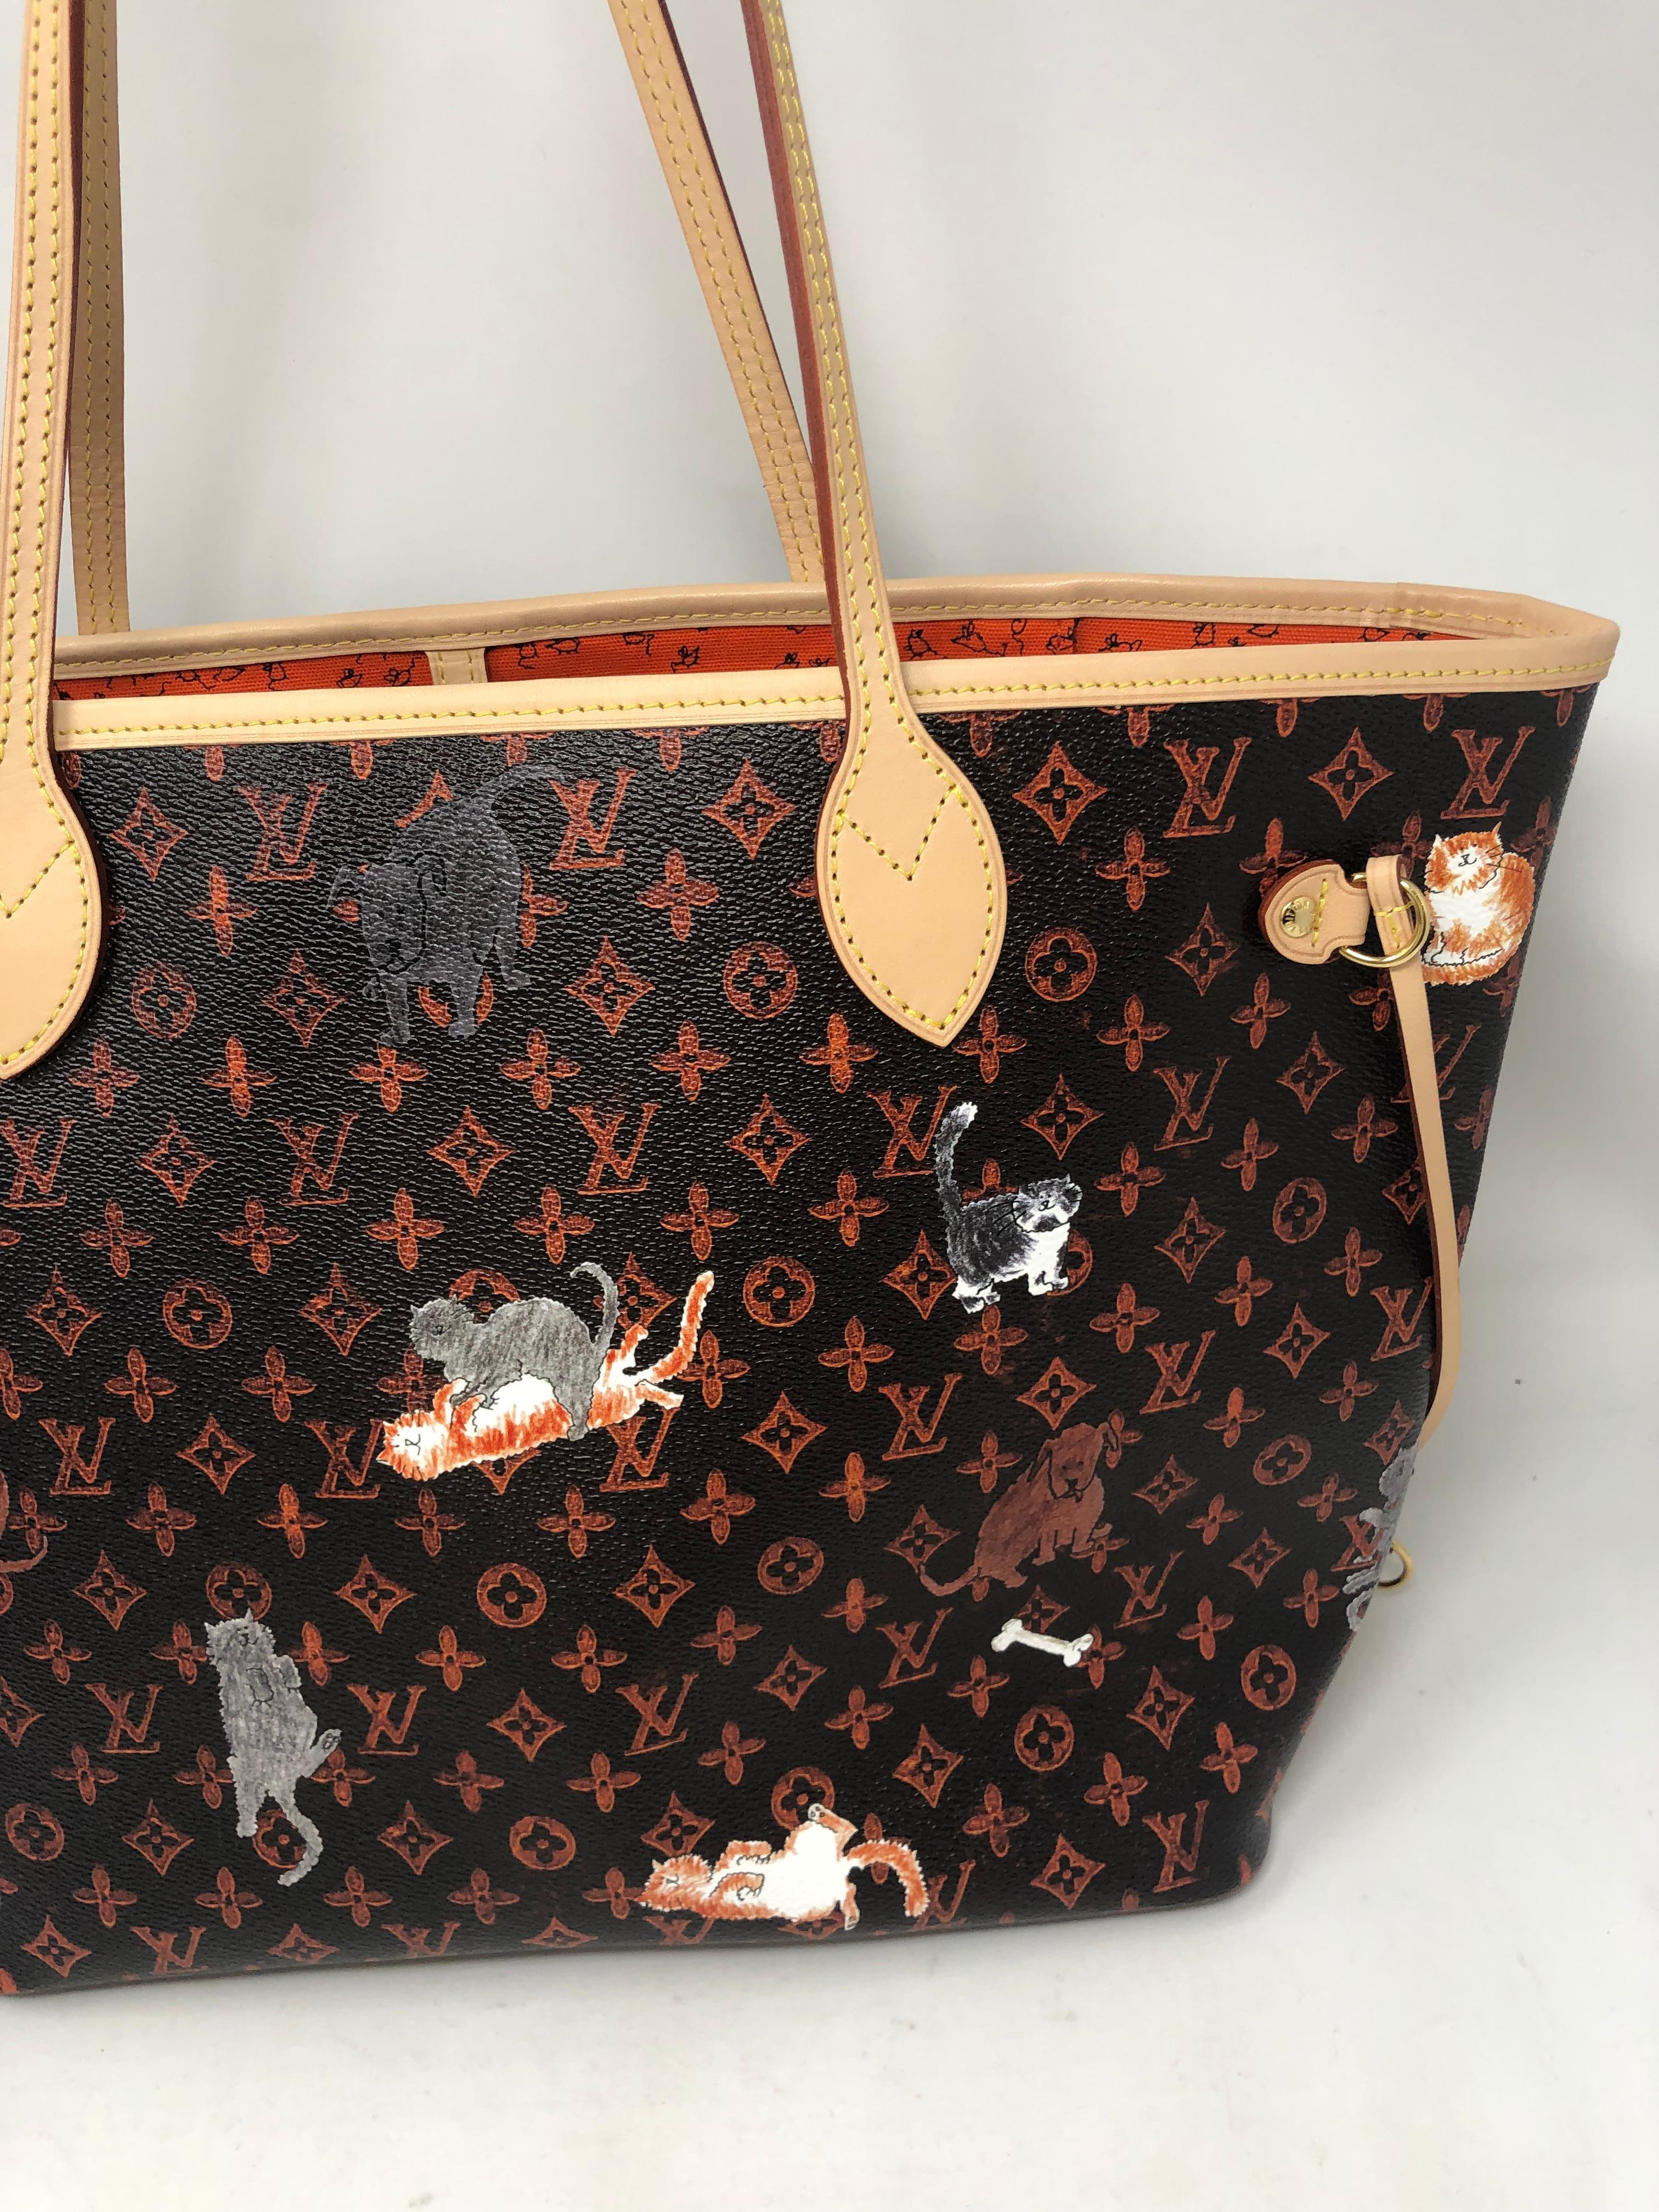 Louis Vuitton Catogram Neverfull MM. Brand new condition. Never used. Rare and limited piece. Collector's item. This is a whimsical neverfull. Guaranteed authentic. 